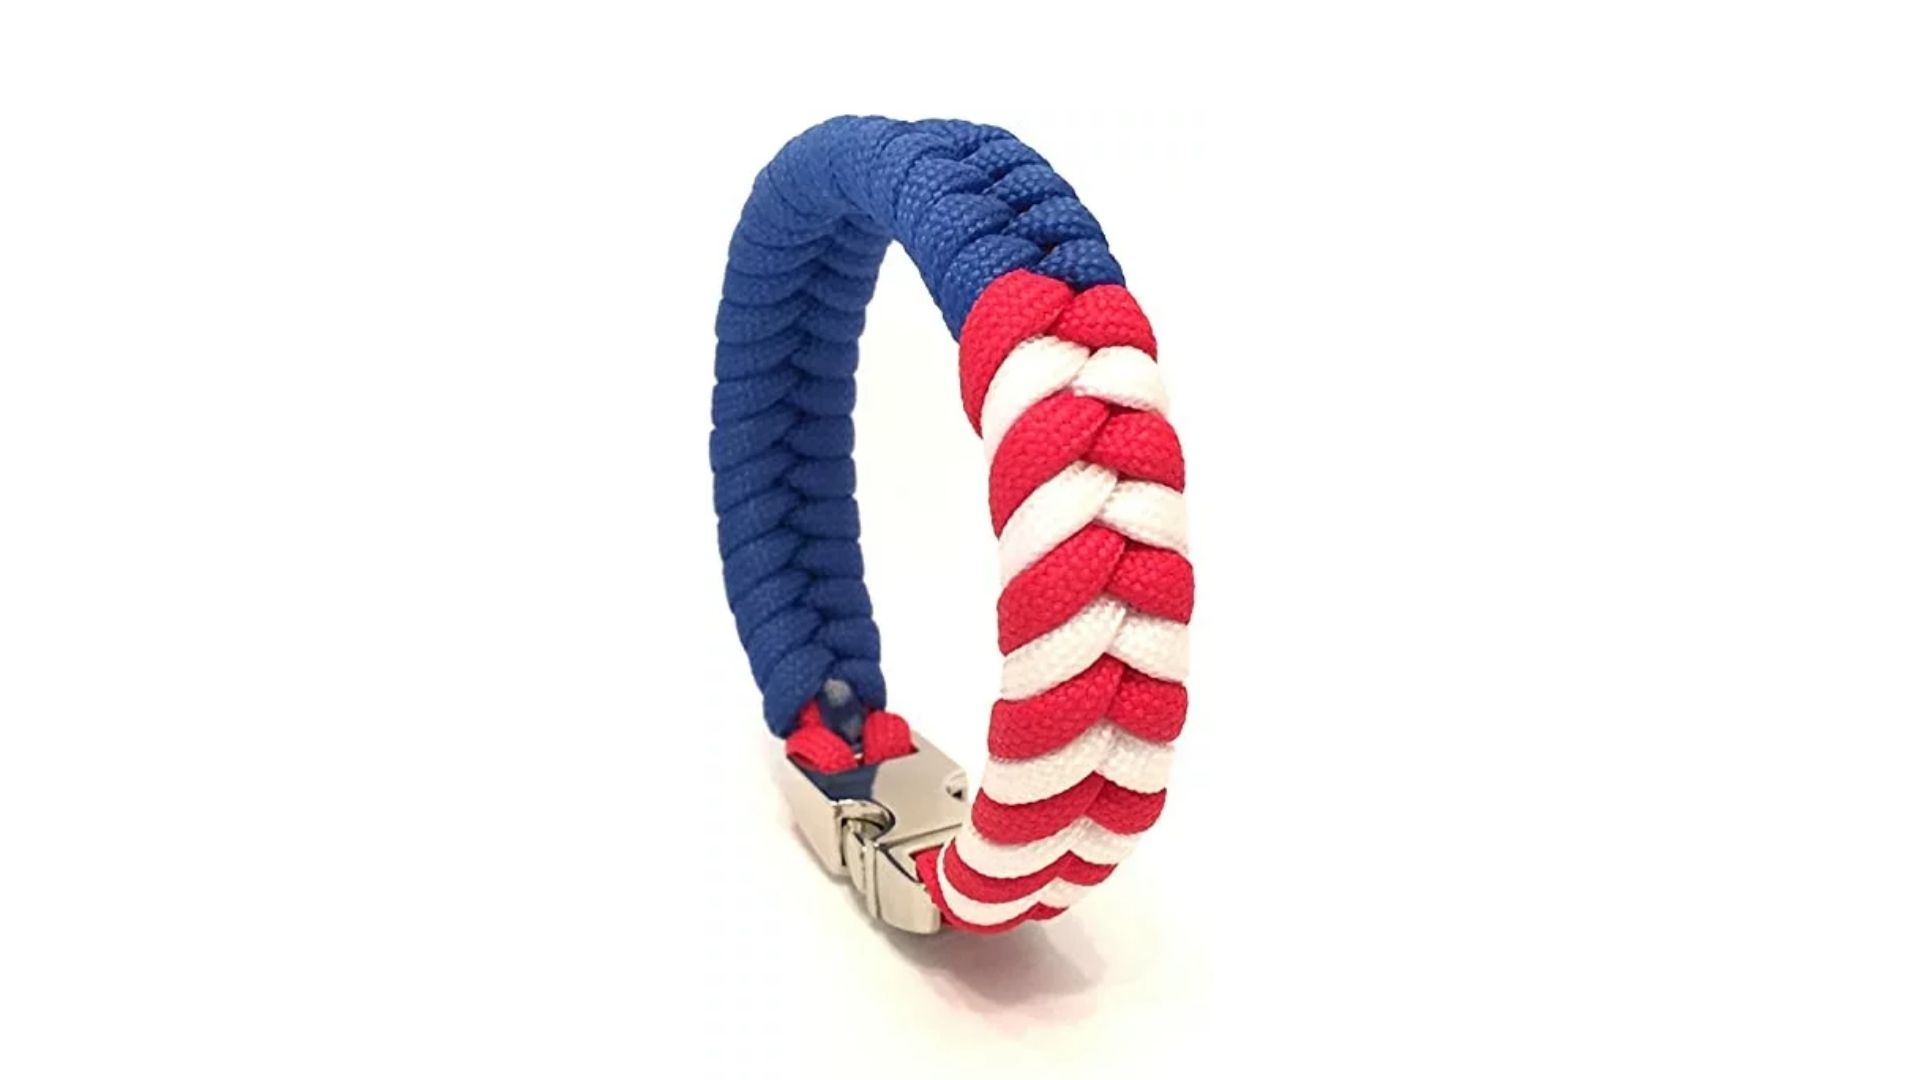 Men's Red White Blue Paracord Bolt Pin Clasp Bracelet Jewelry